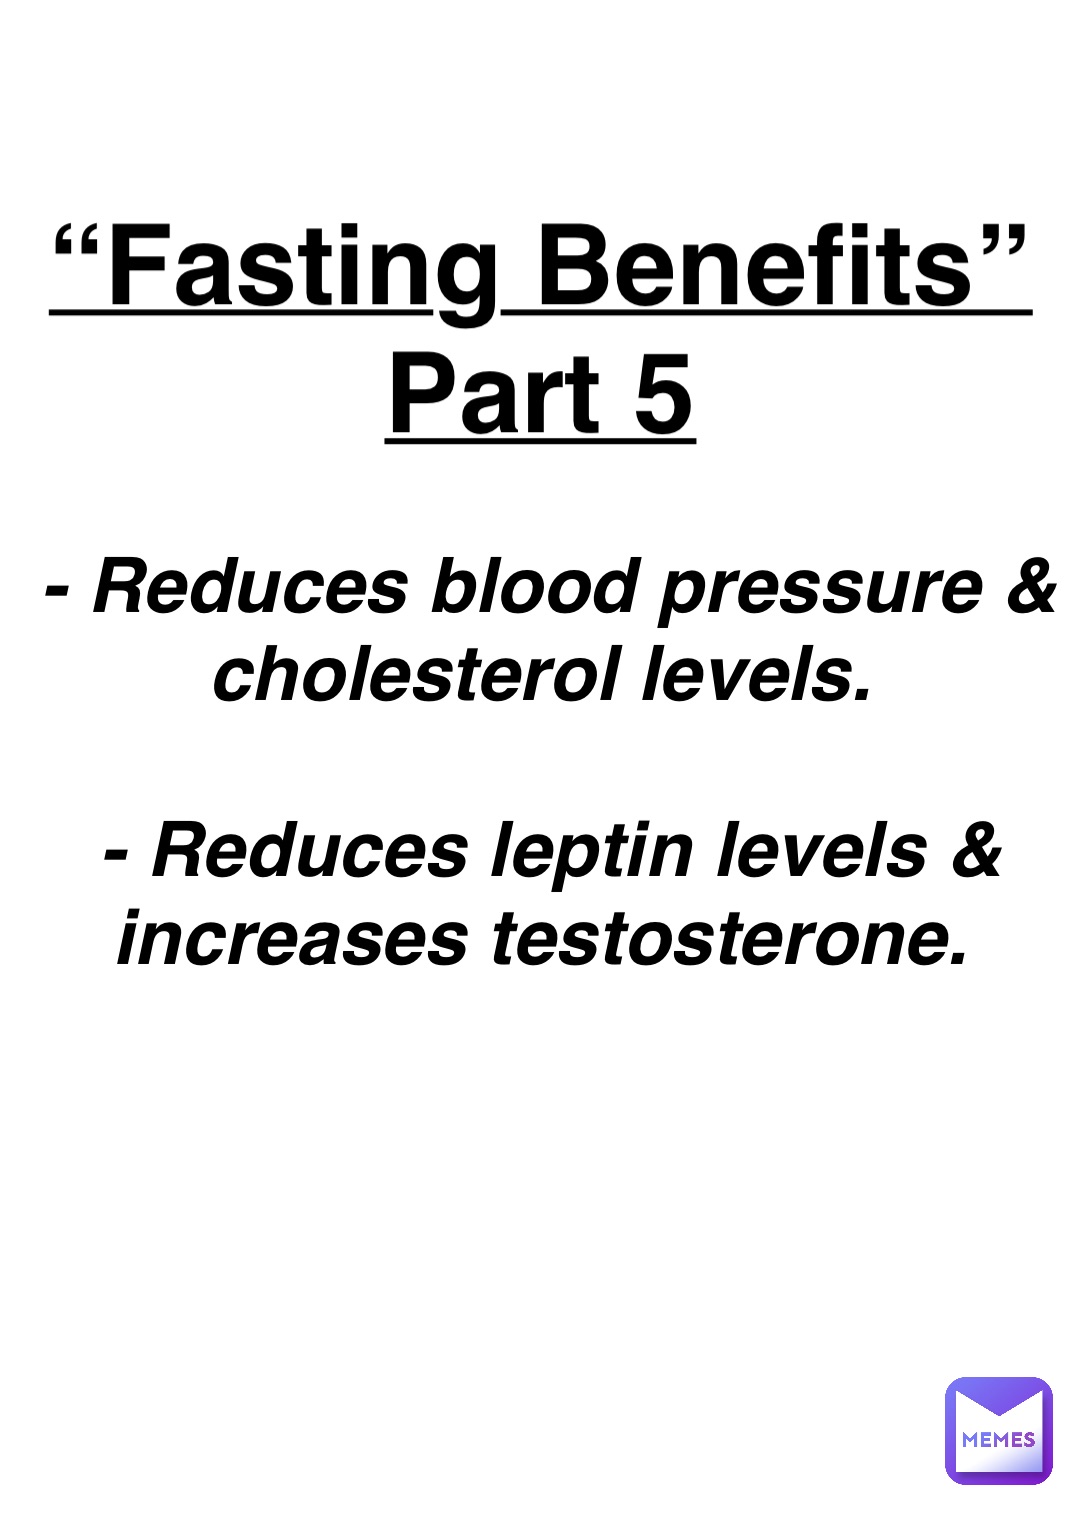 Double tap to edit “Fasting Benefits”
Part 5 - Reduces blood pressure & cholesterol levels.

- Reduces leptin levels & increases testosterone.